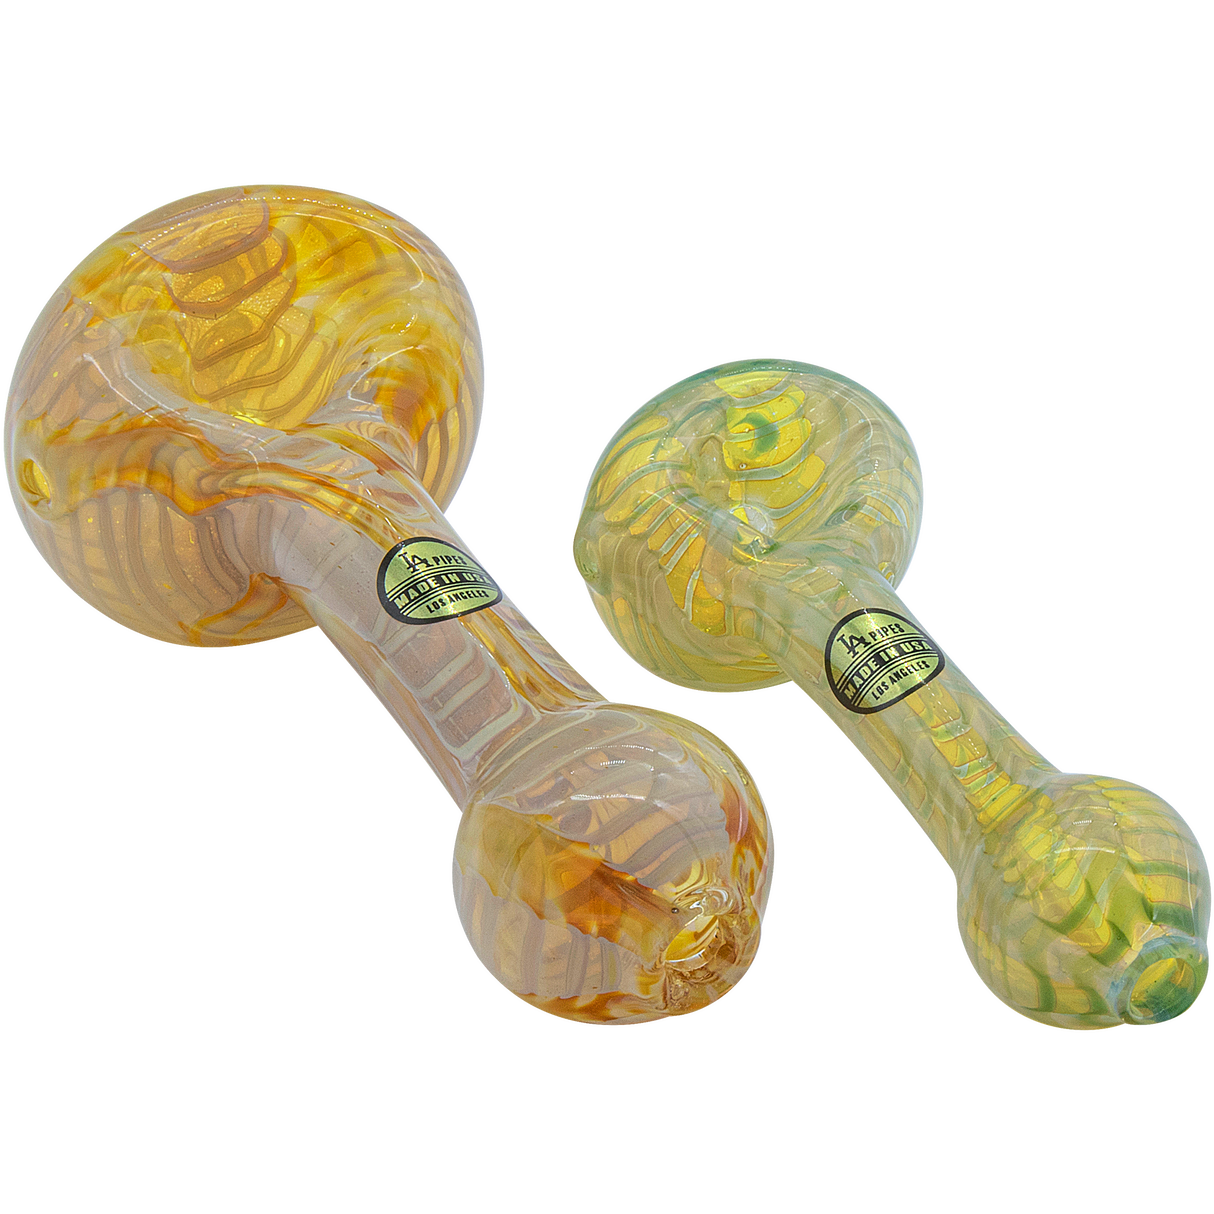 LA Pipes "Raker" Glass Spoon Pipes with Fumed Color Changing Design